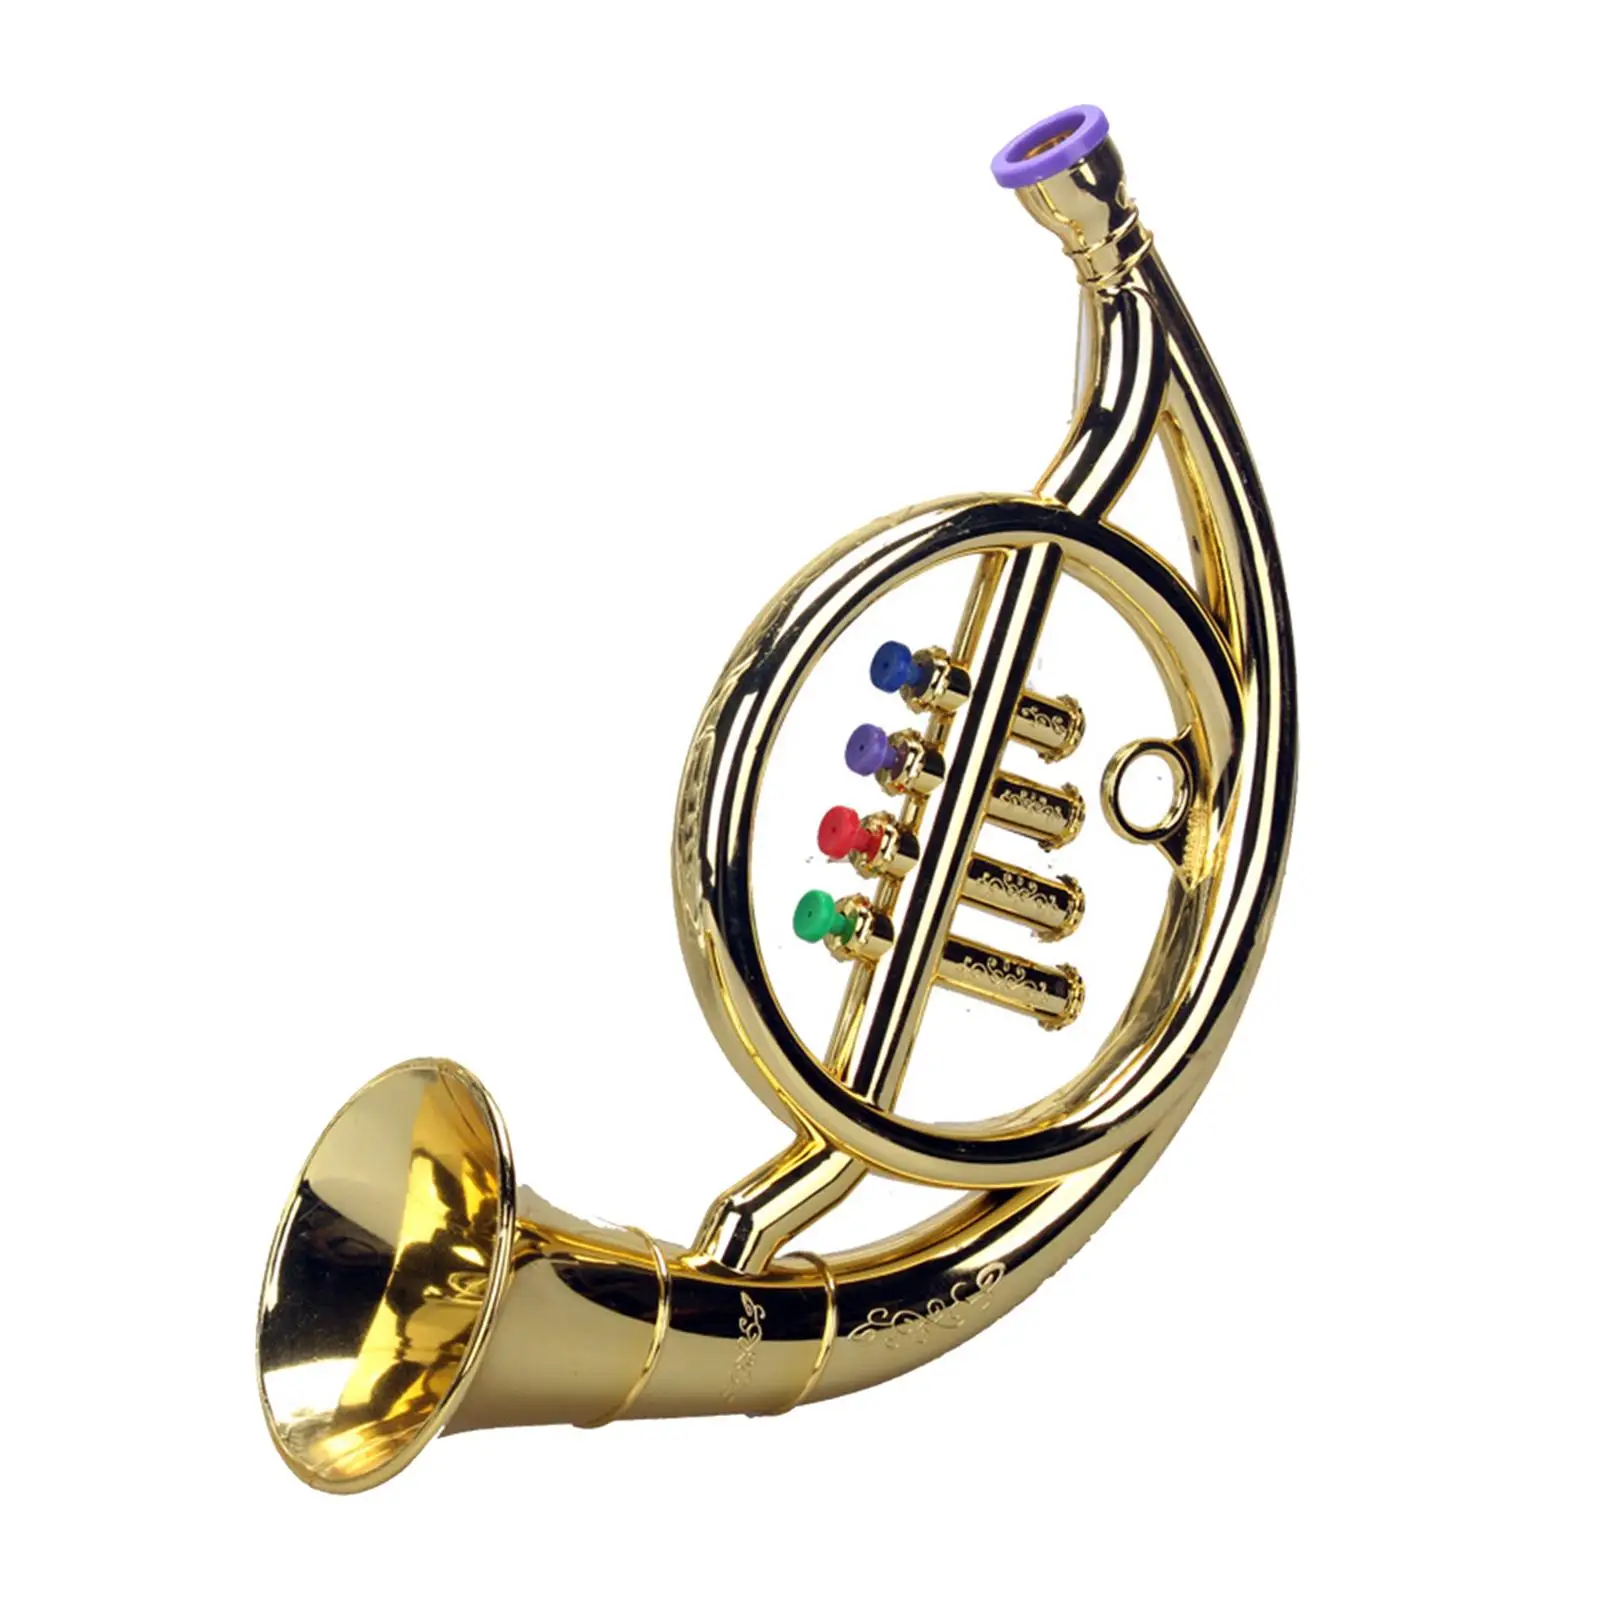 Musical 4  ABS Metallic Game Toy Mini Props Simulation Wind Instruments French Horn for Party 3 Years And Up Preschool Boys